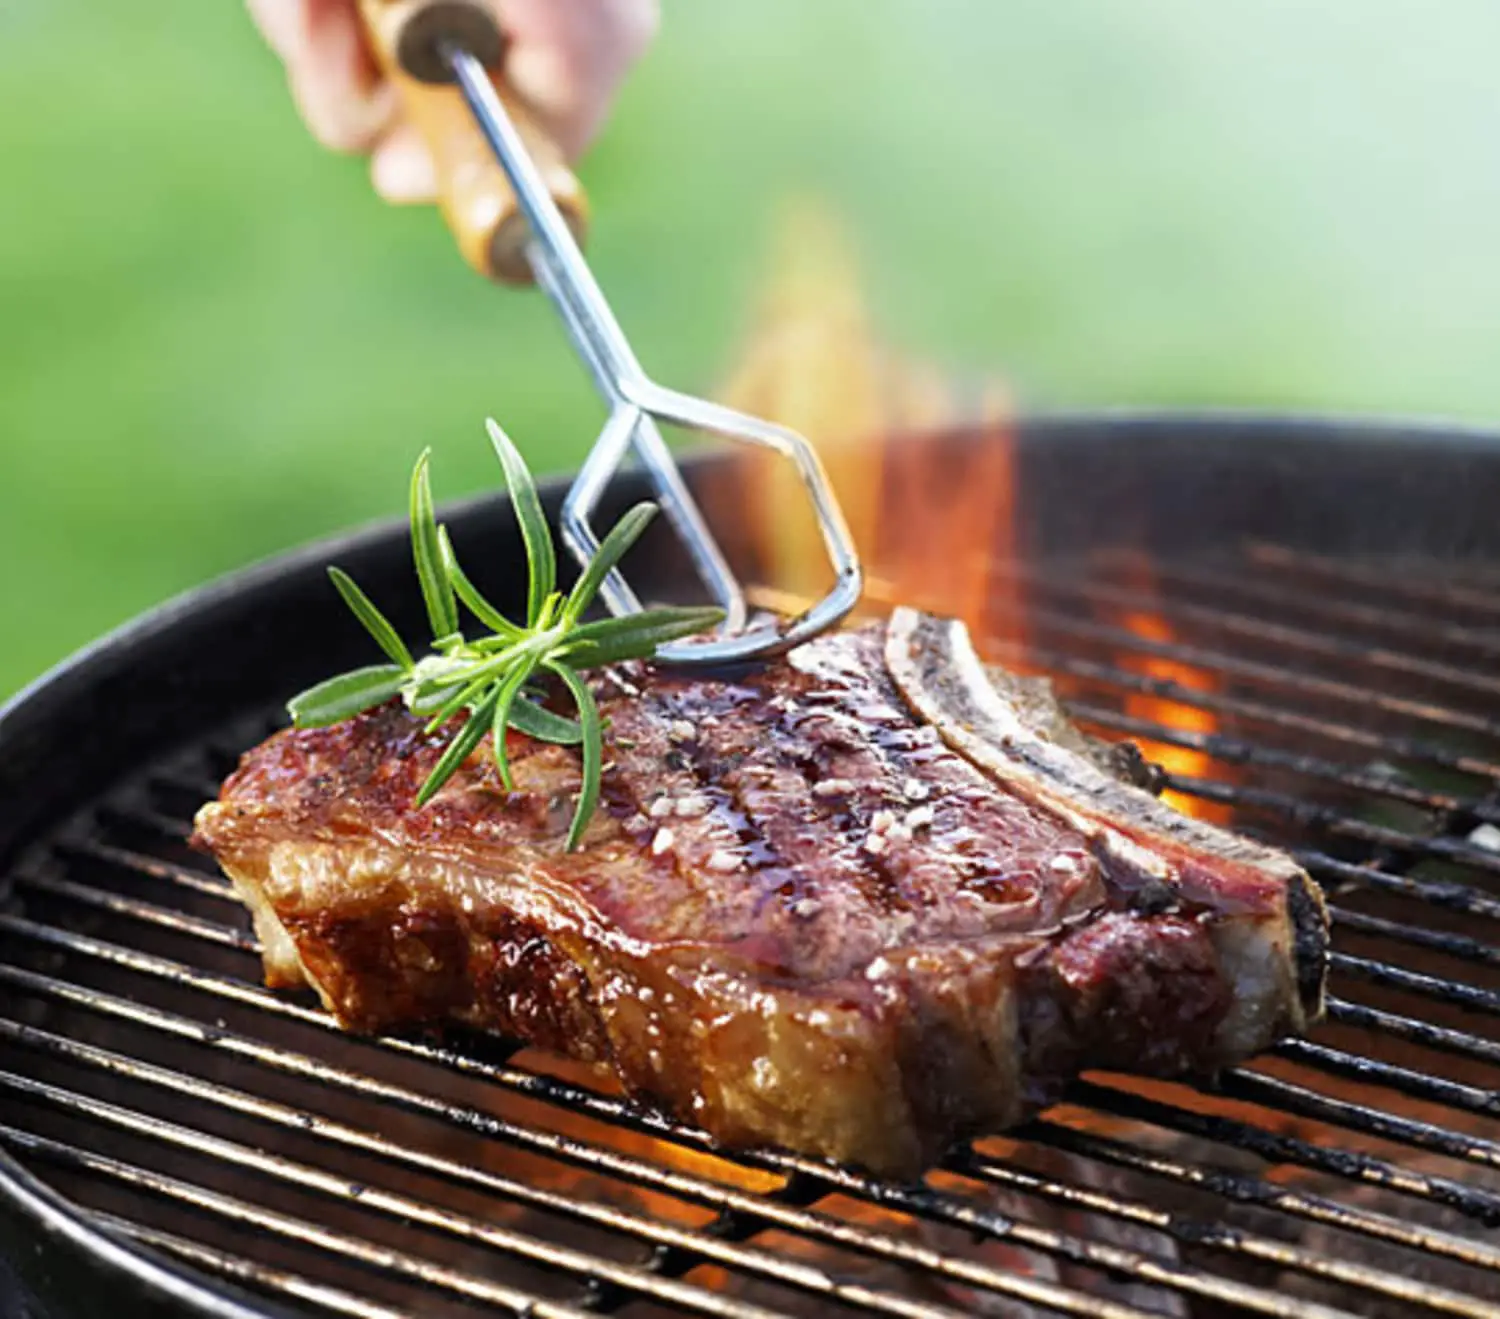 Grill the Best Steak of Your Life in 6 Steps